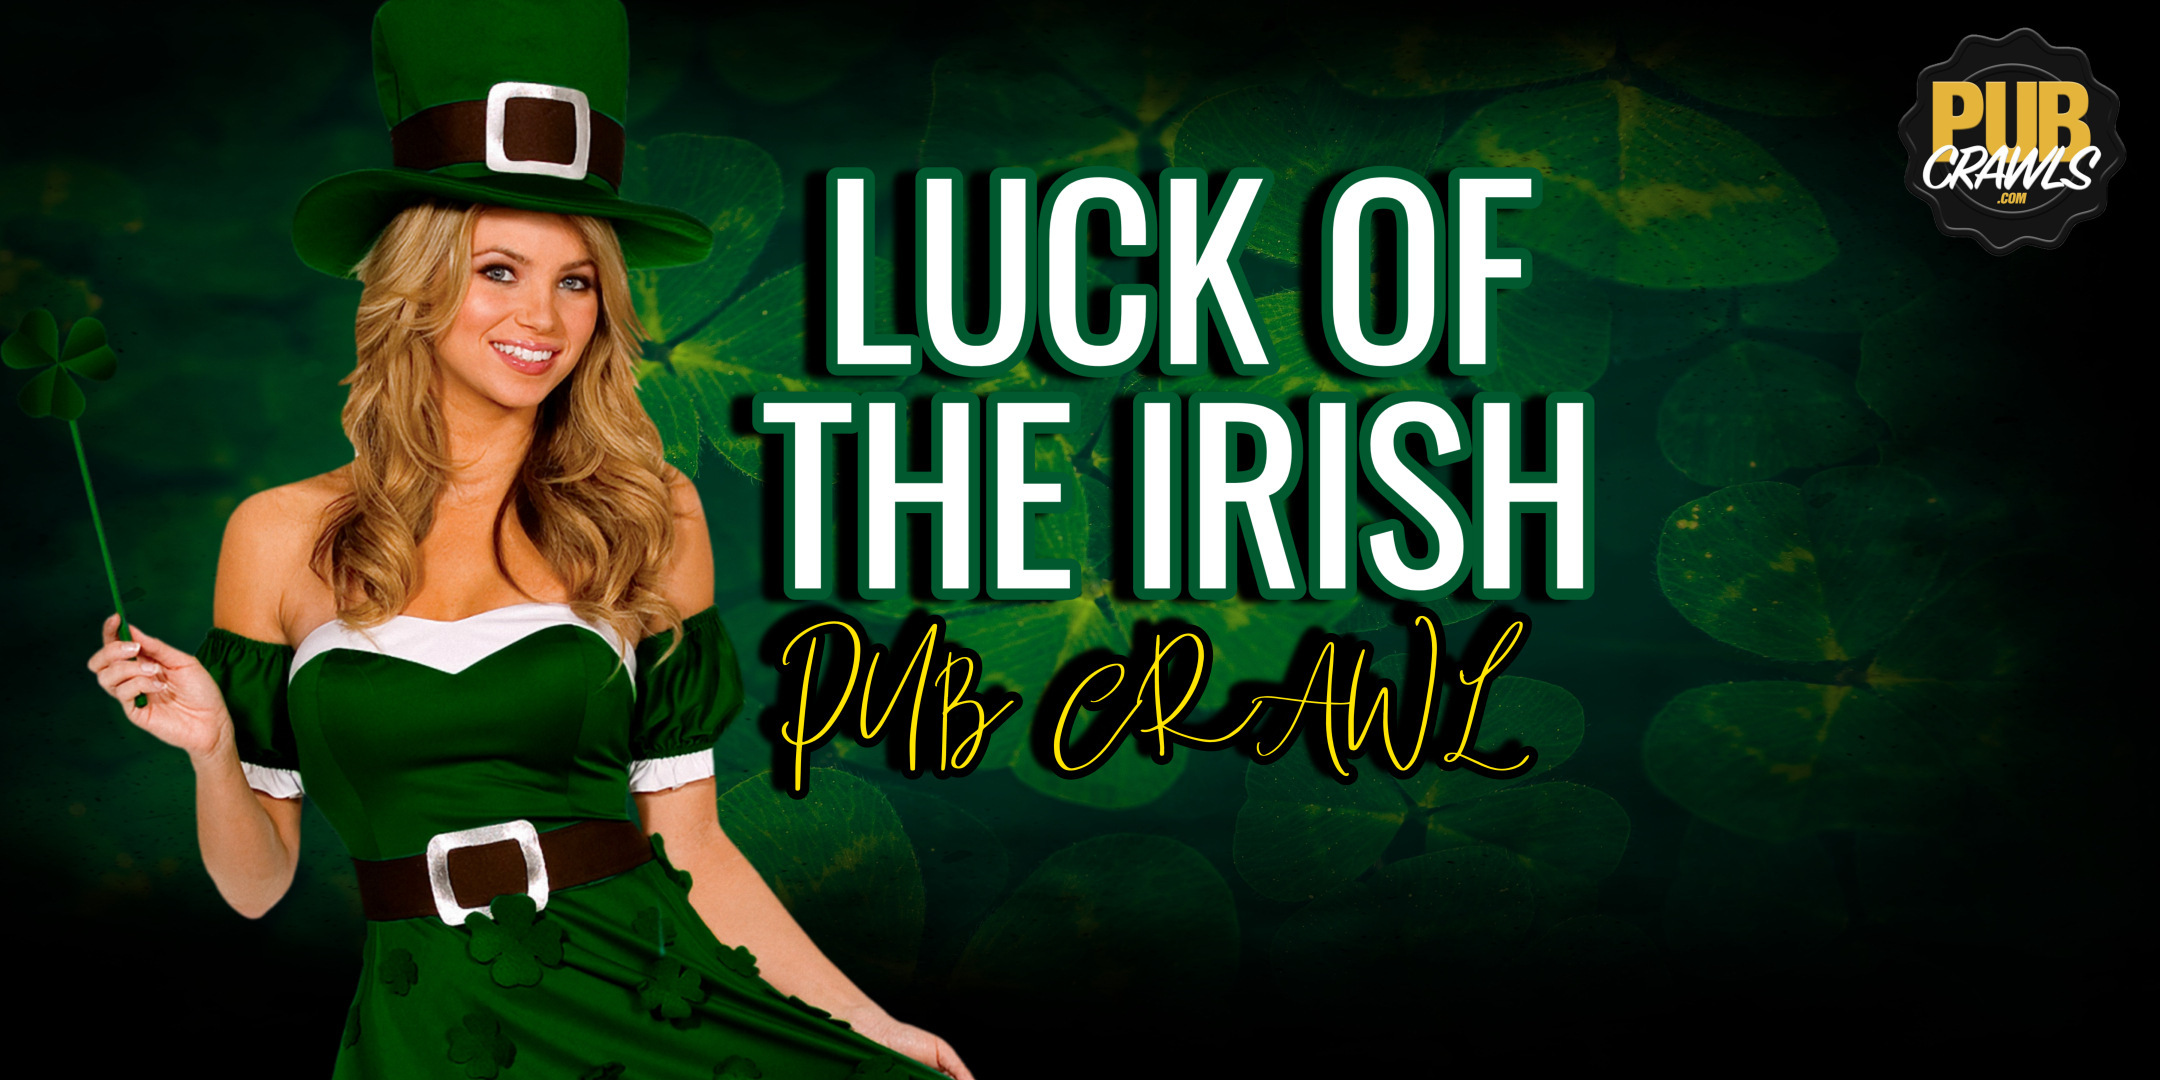  Fort Worth Luck Of The Irish St Paddy's Day Weekend Bar Crawl